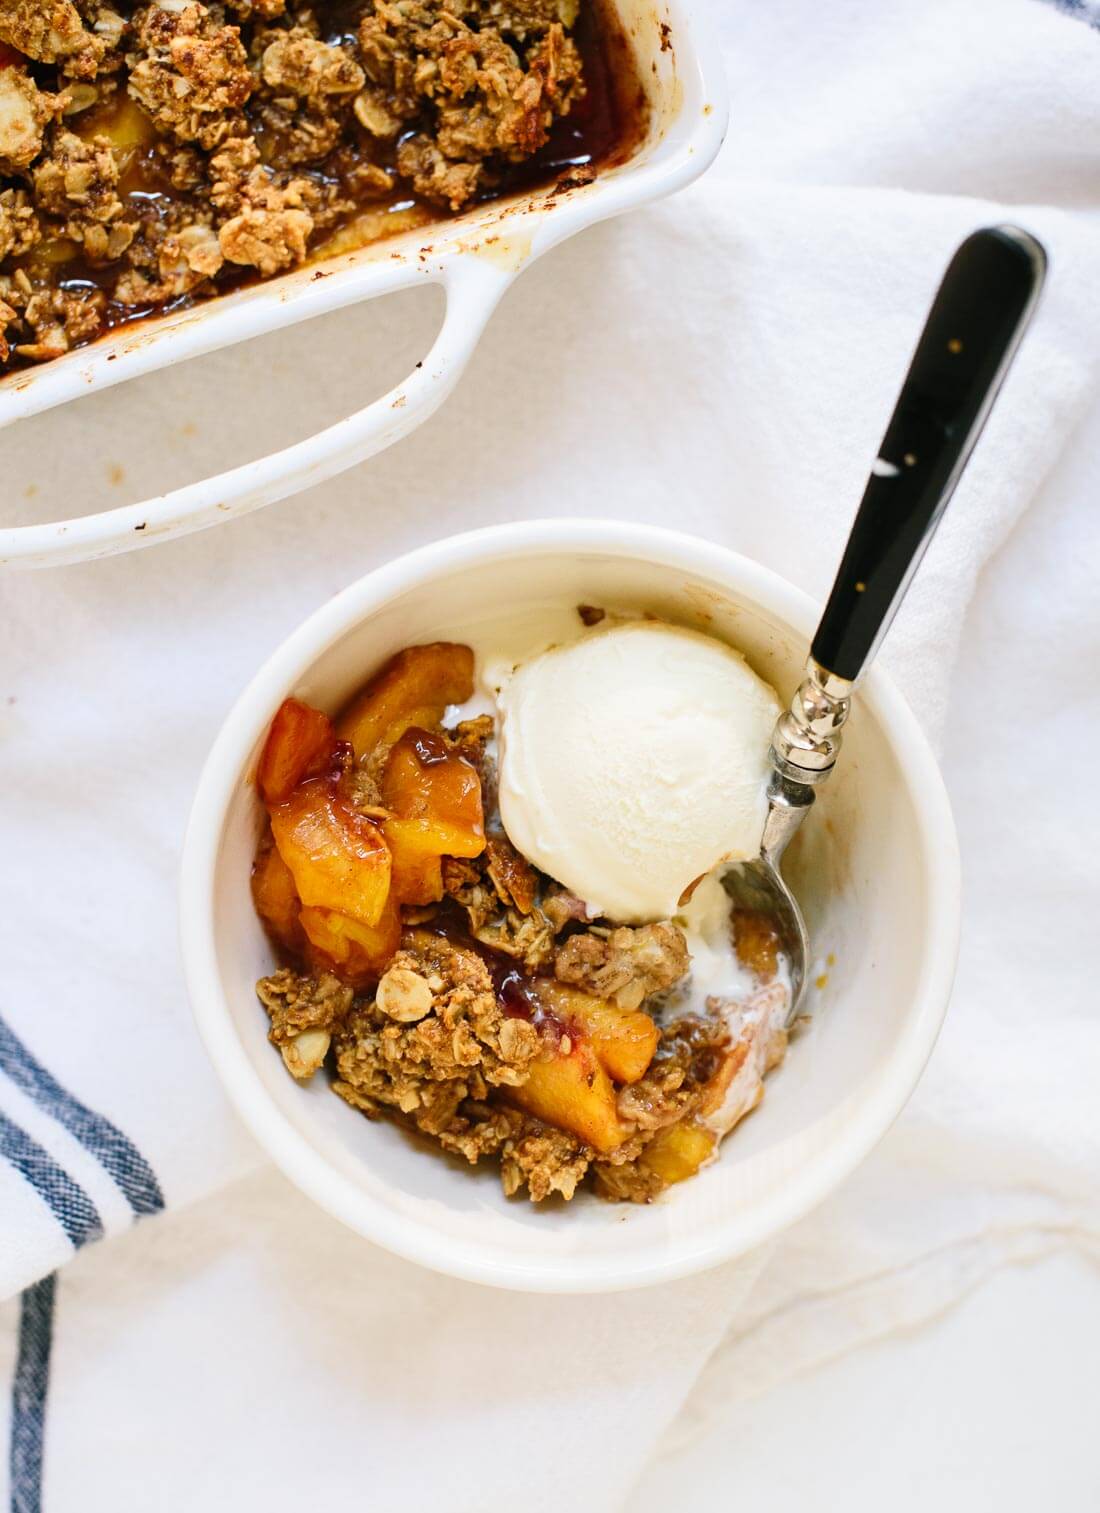 This amazing peach crisp recipe features ripe summer peaches, almonds and oats! cookieandkate.com